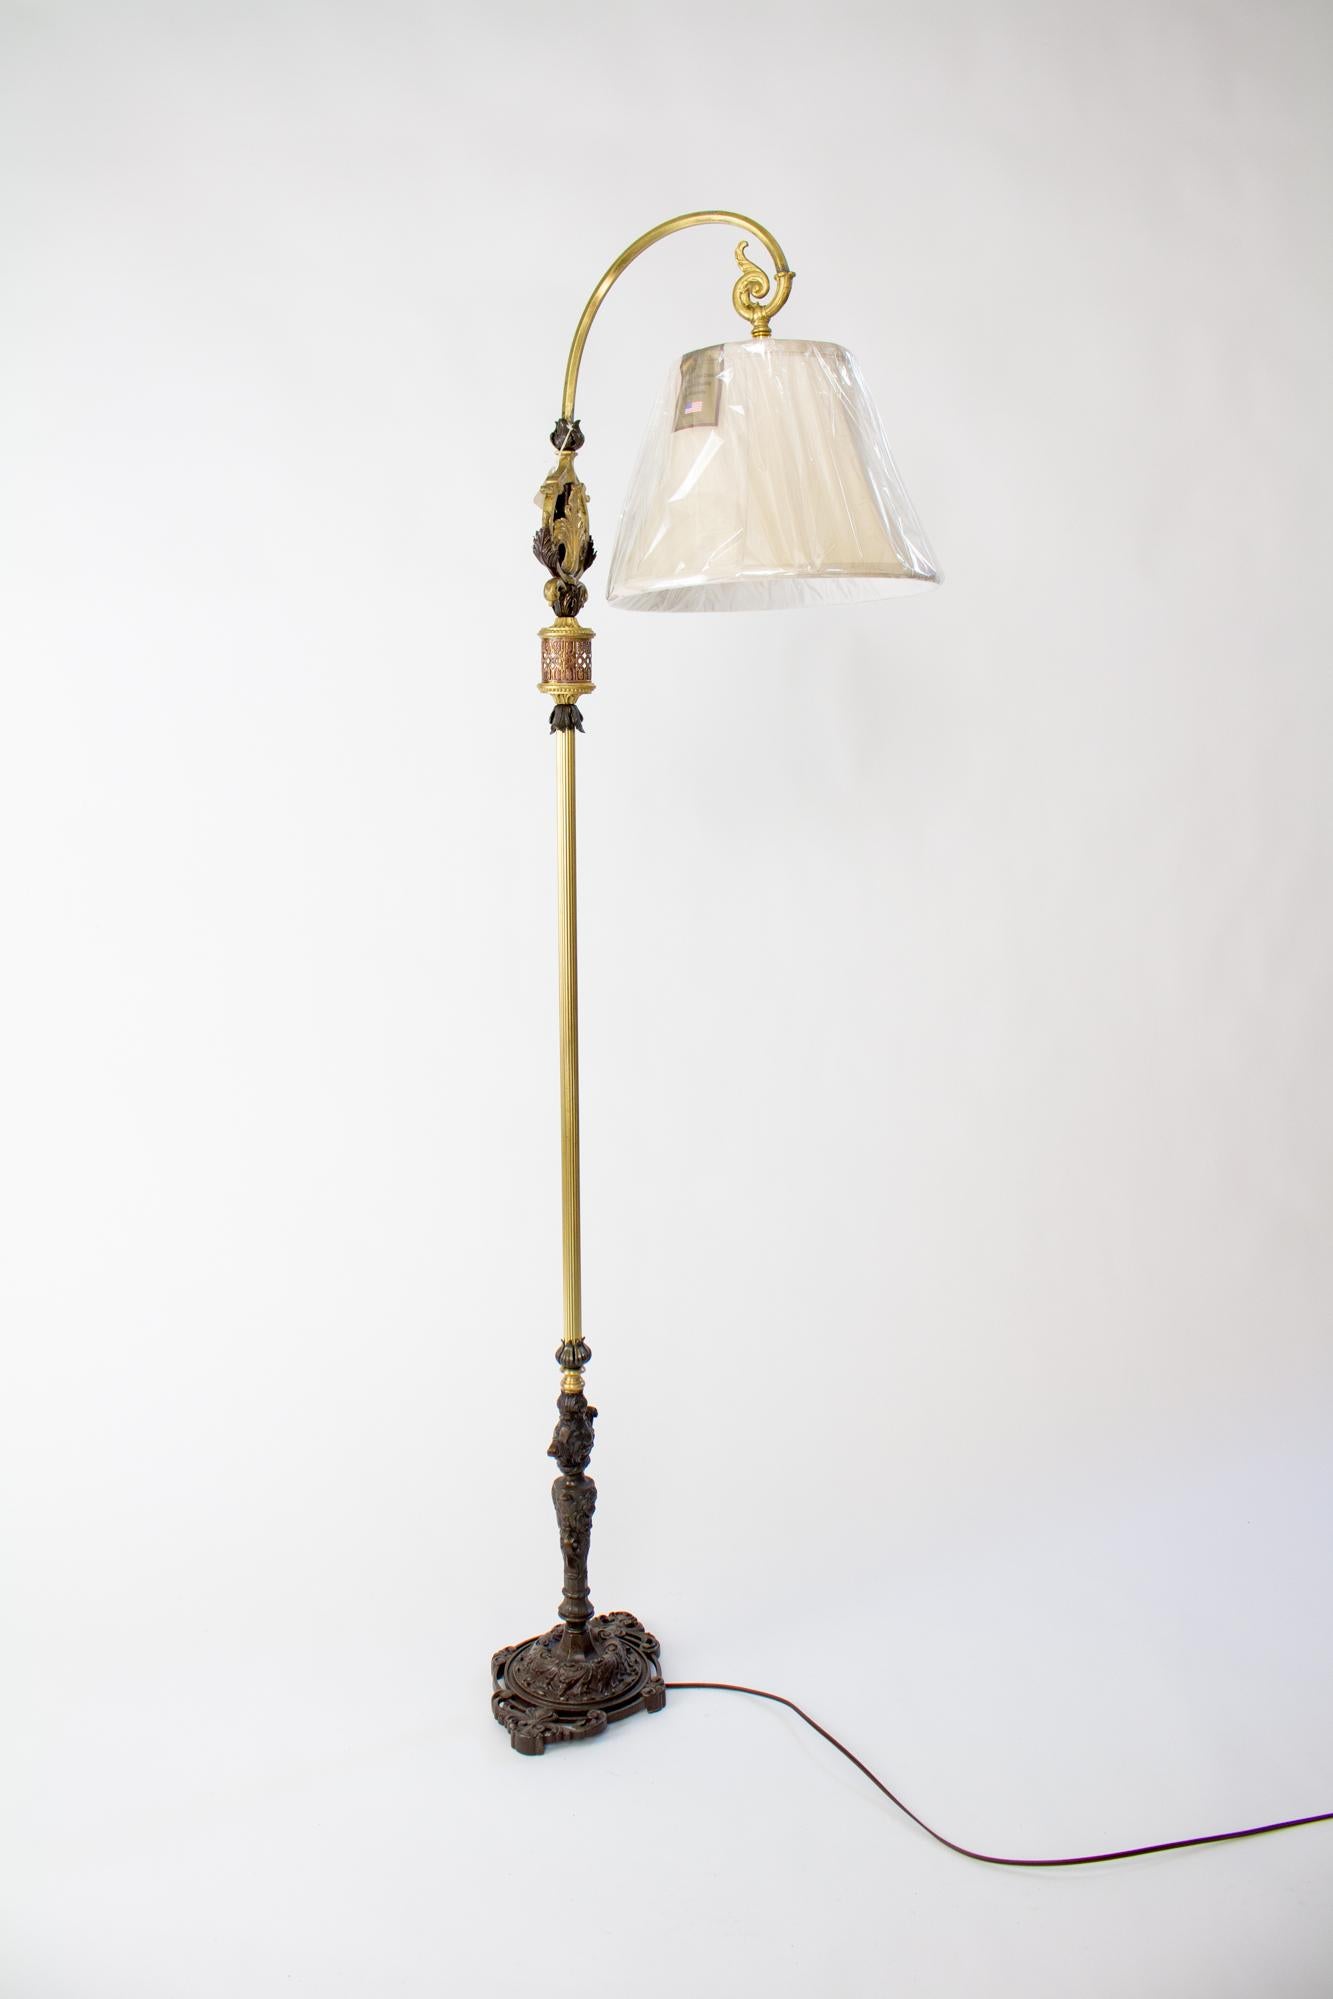 1920’s Rococo Revival Cast iron and Brass Bridge Lamp with Shade In Excellent Condition For Sale In Canton, MA